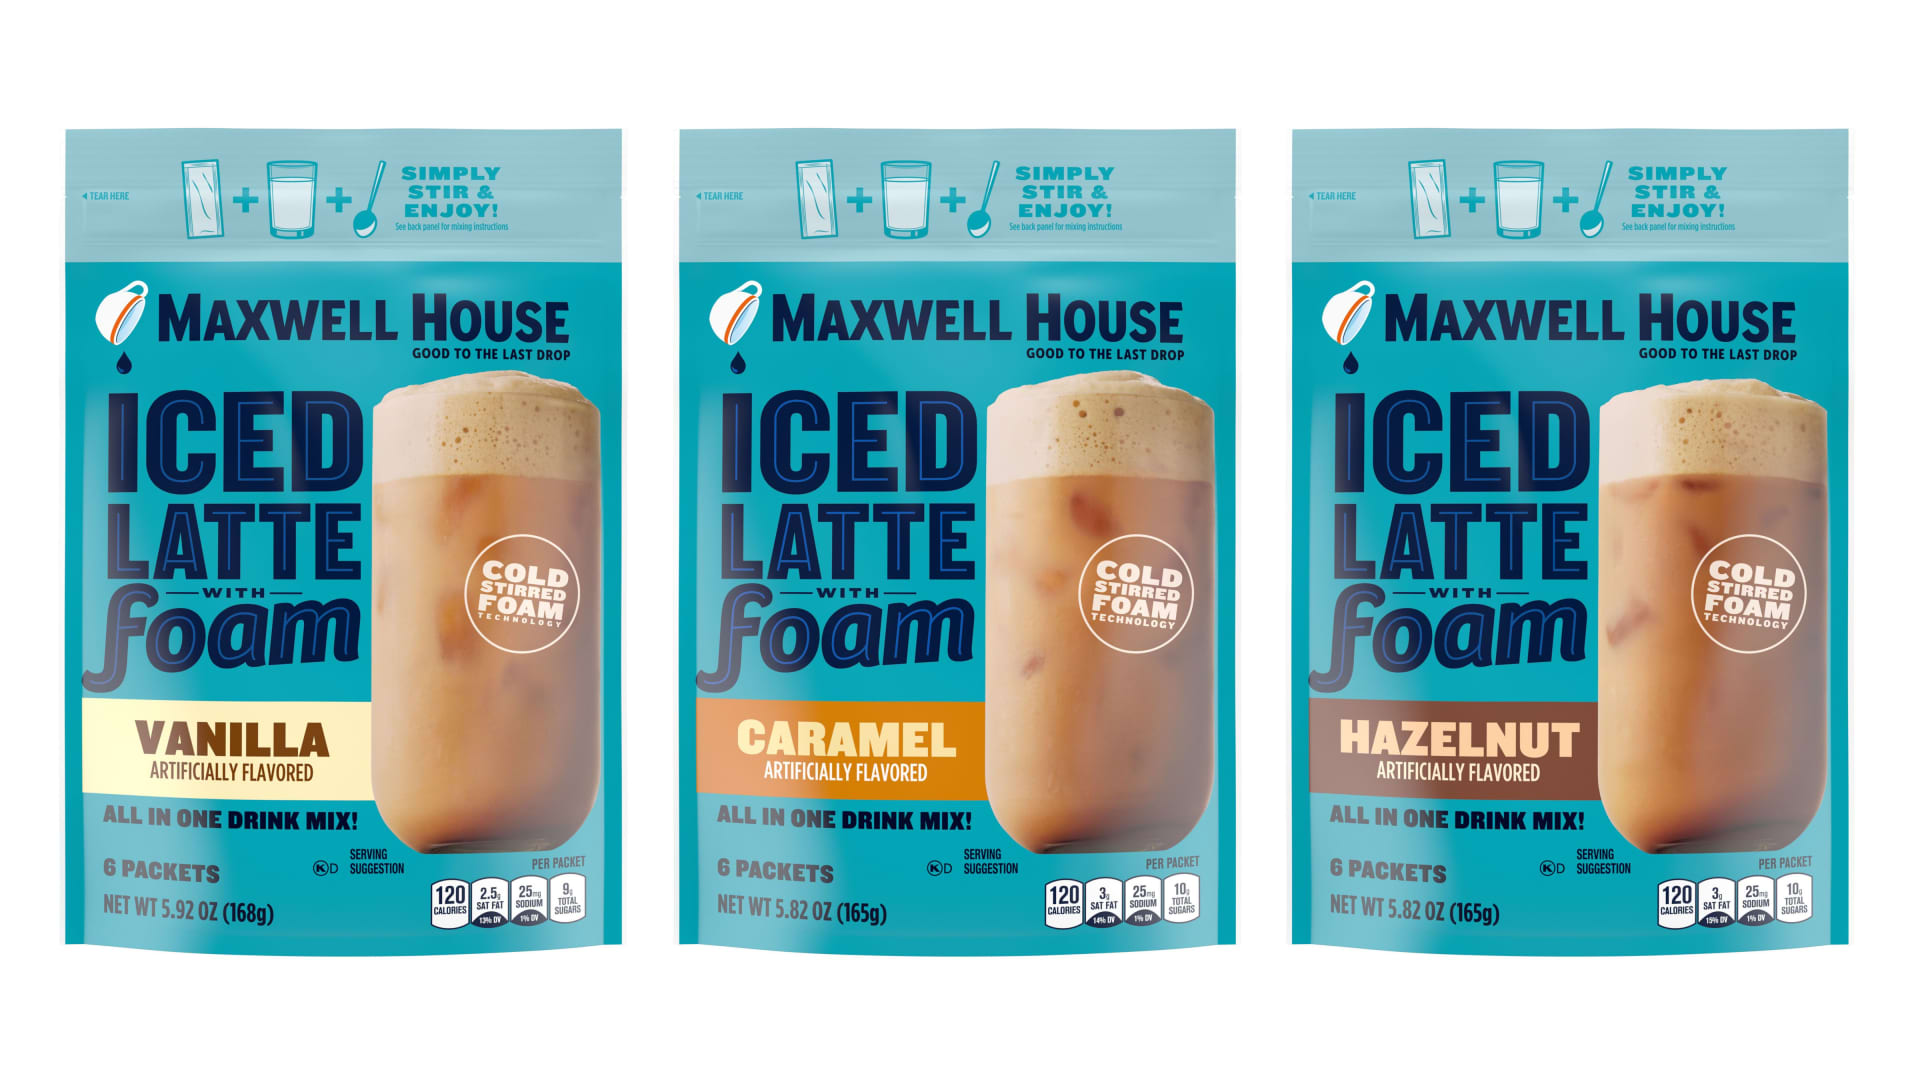 Kraft Heinz looks to revive Maxwell House brand with new instant iced latte with foam